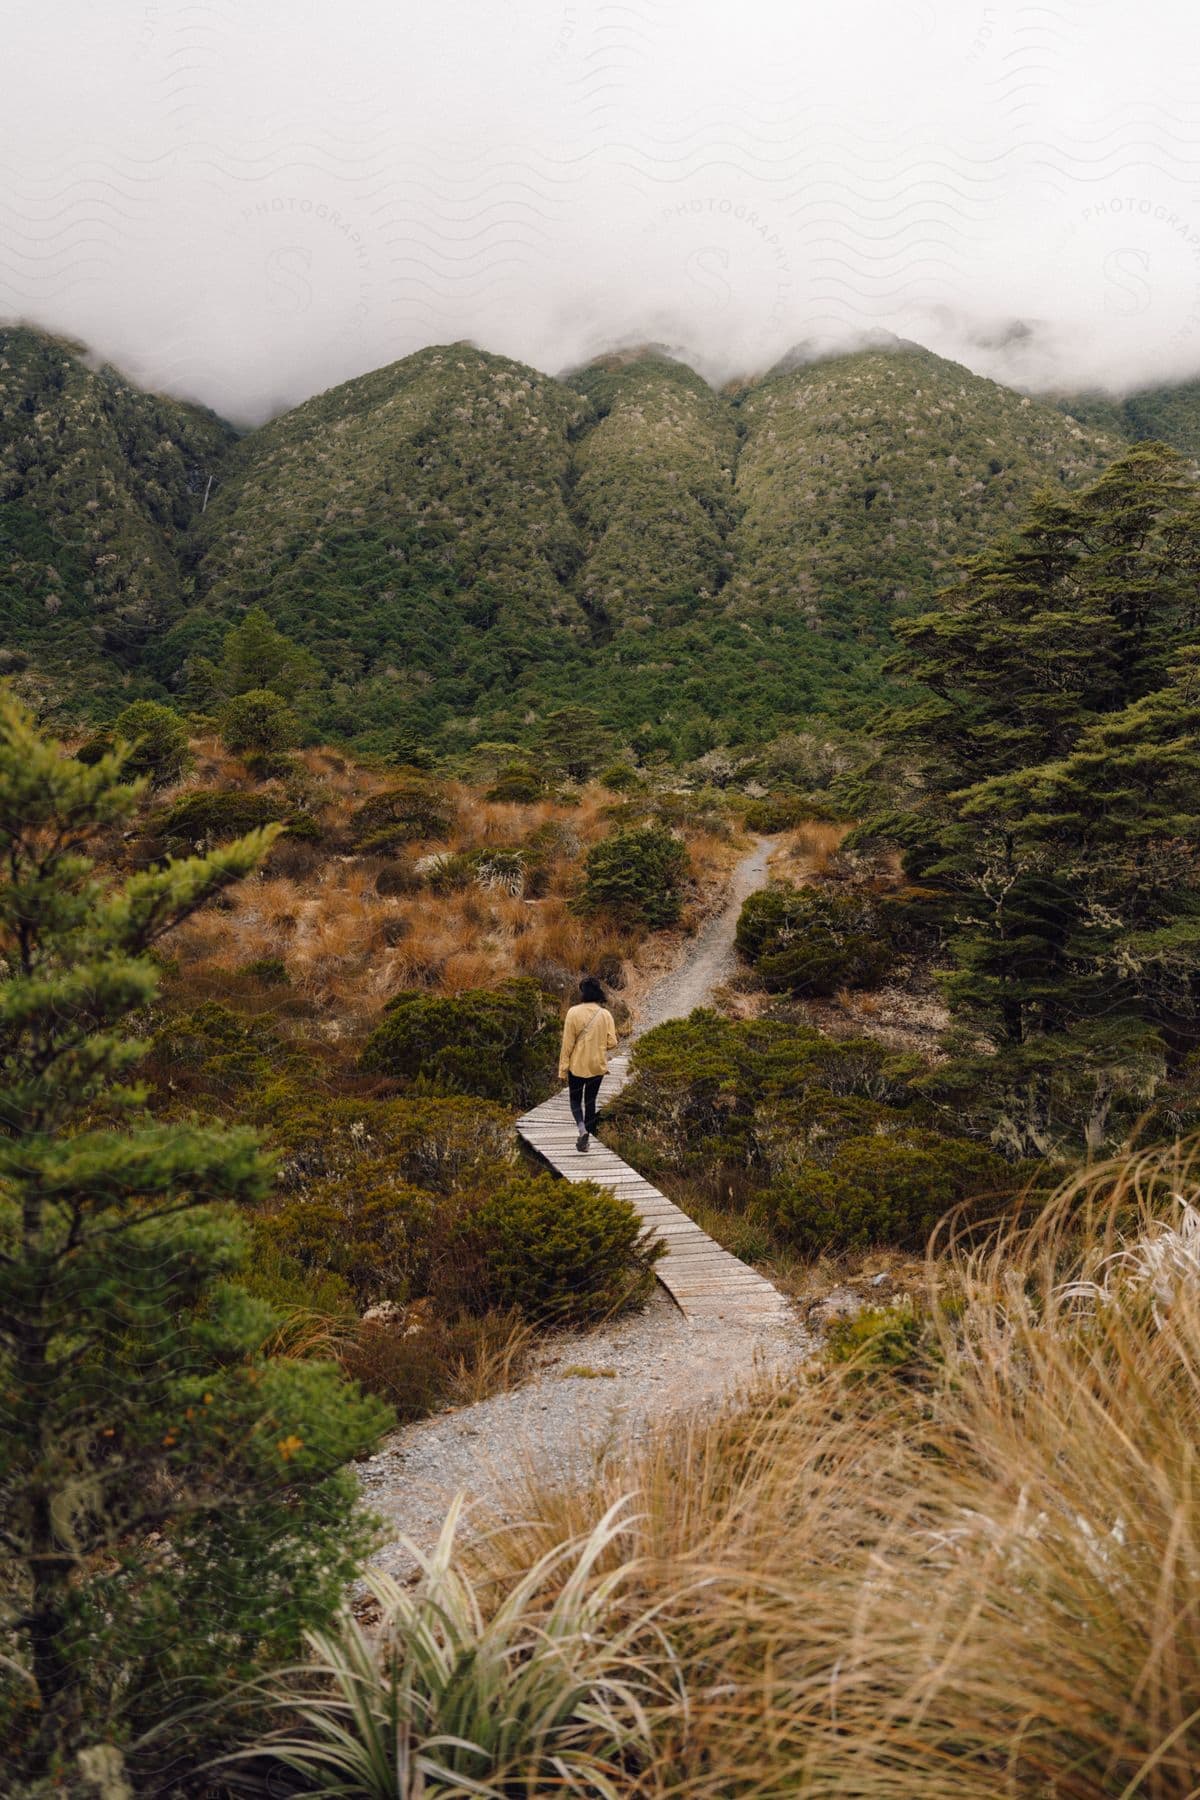 Woman walking along a trail in a natural environment with mountains in the background on a cloudy day.